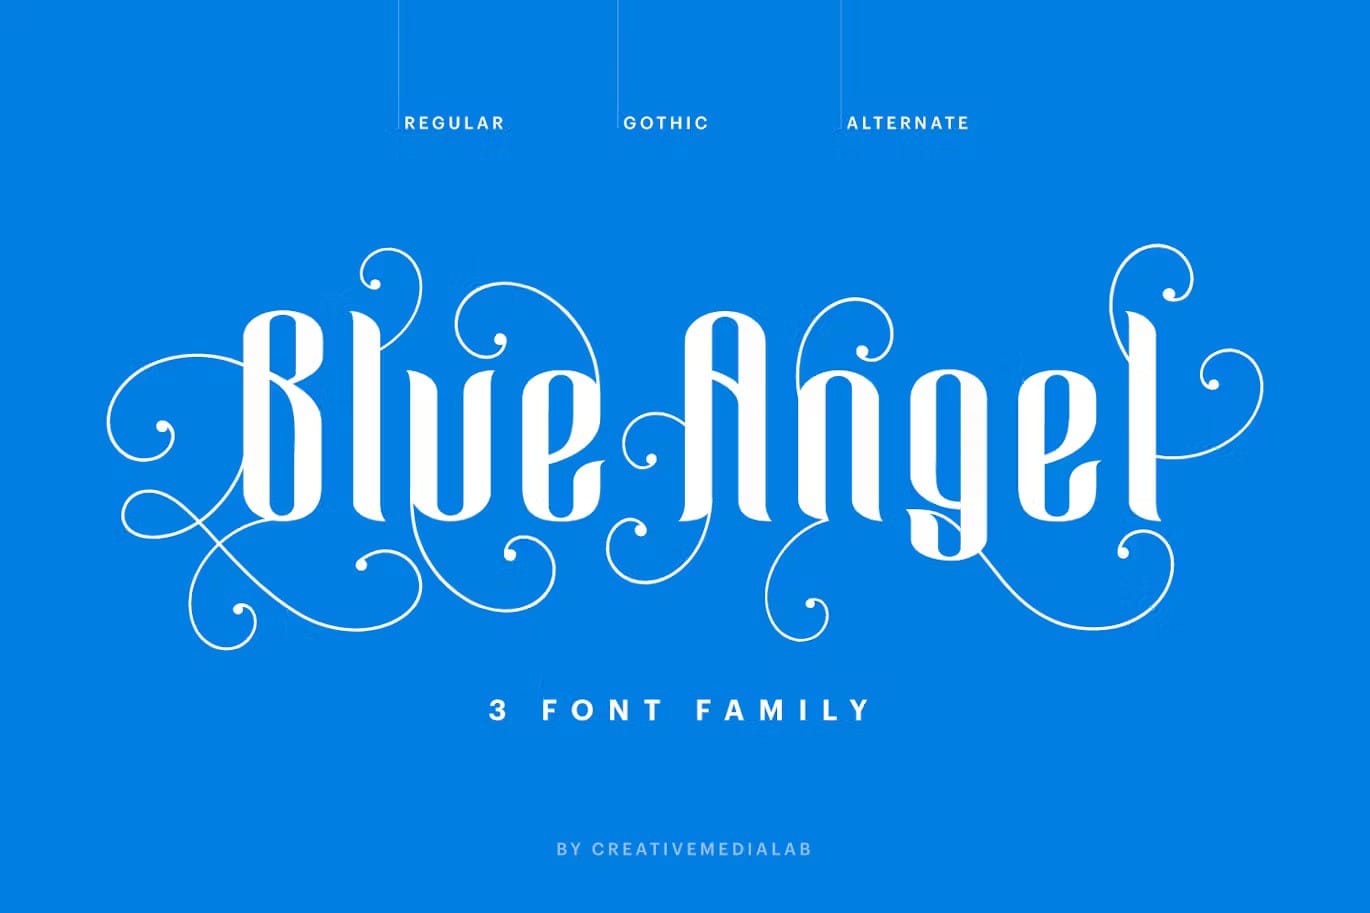 30+ Heavenly Angelic Fonts for Sacred Designs